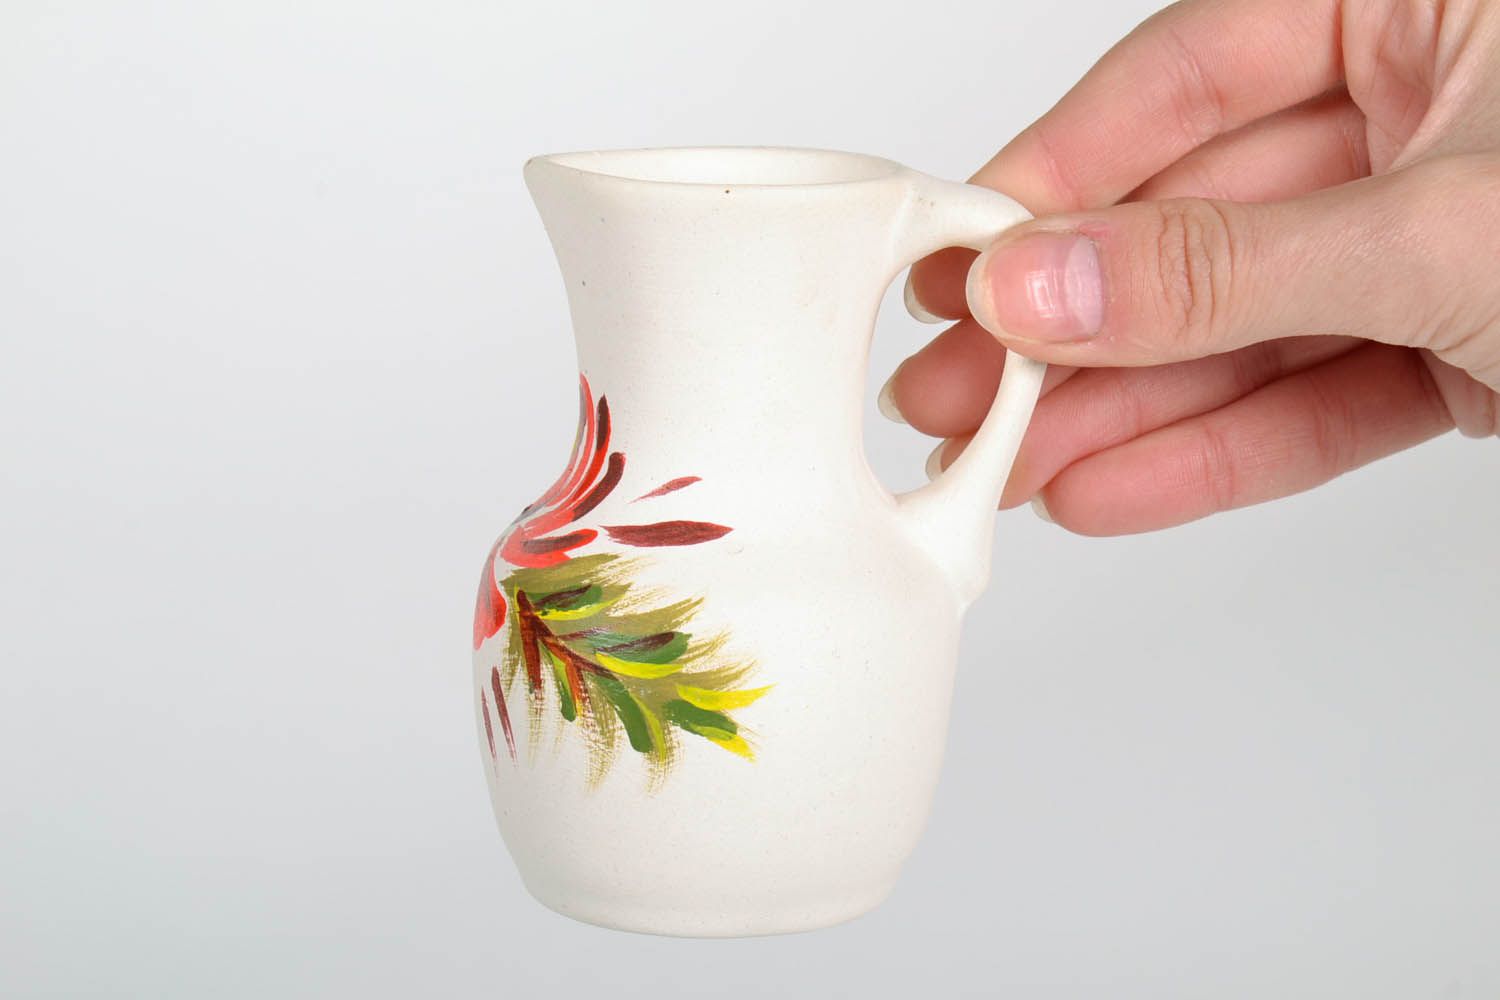 5 oz ceramic white pitcher with handle and floral design 0,26 lb photo 2